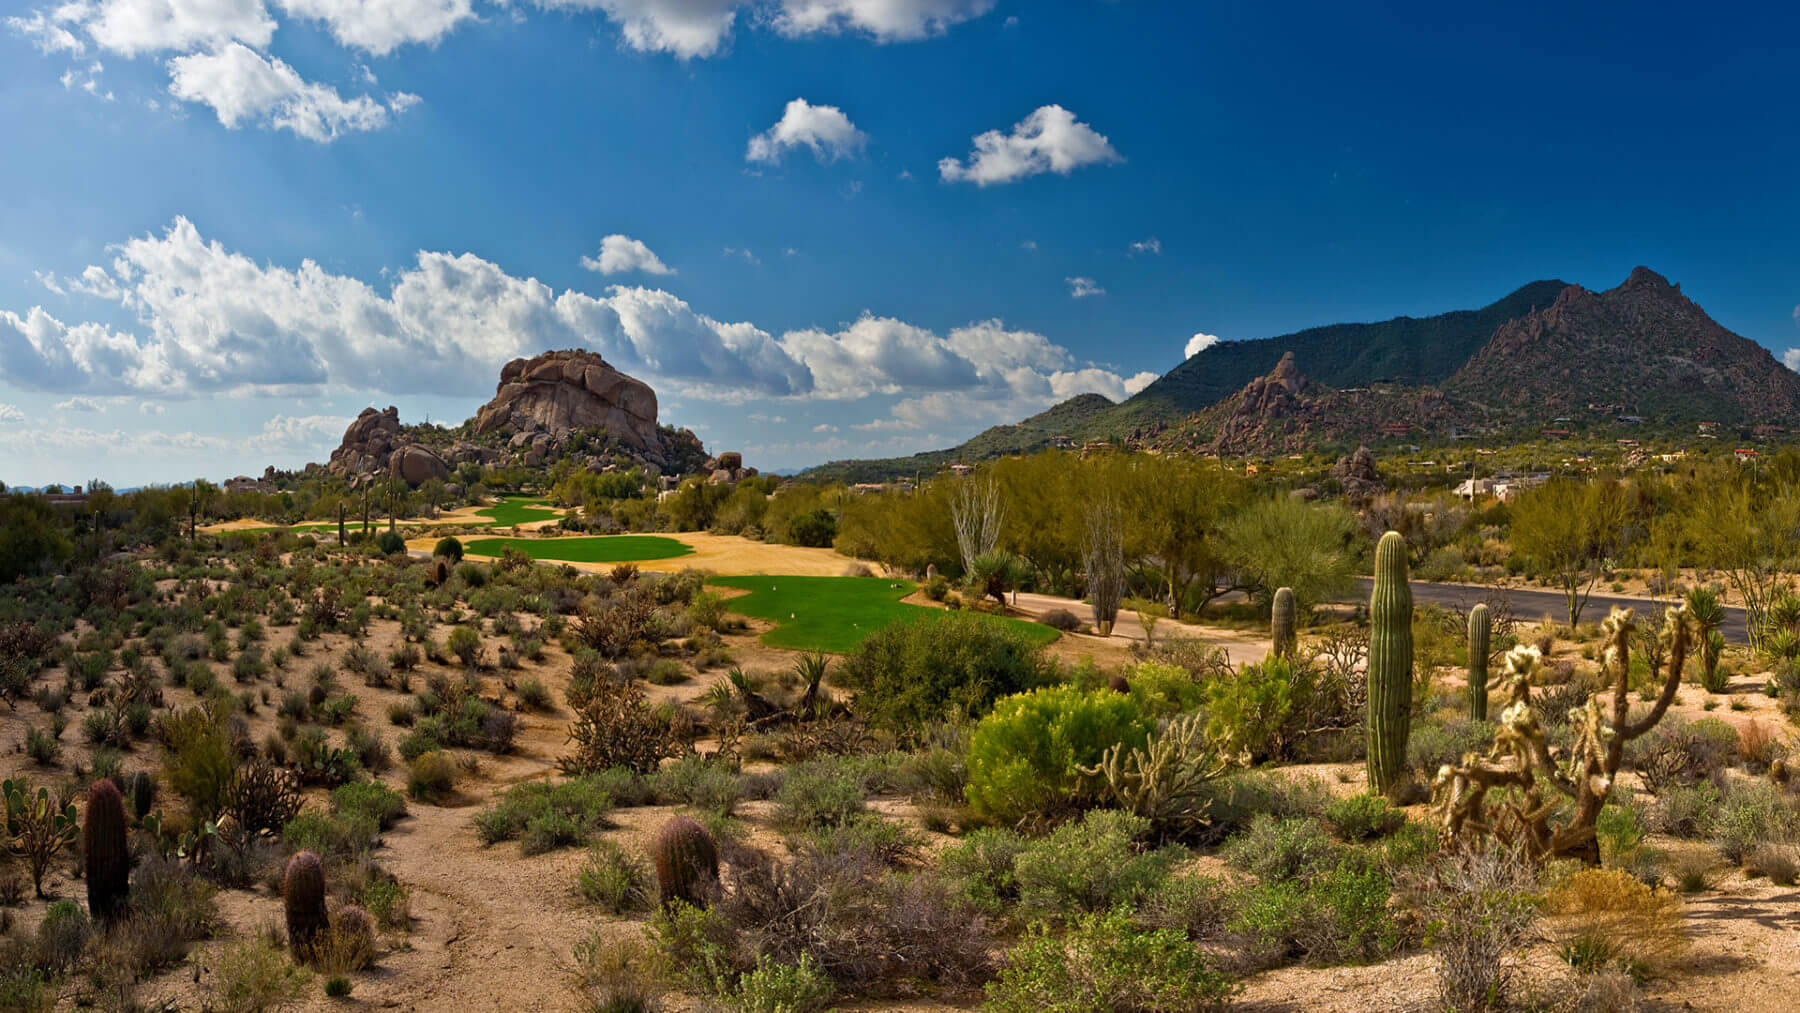 The South Course stands amongst The Sonoran Desert Landscape